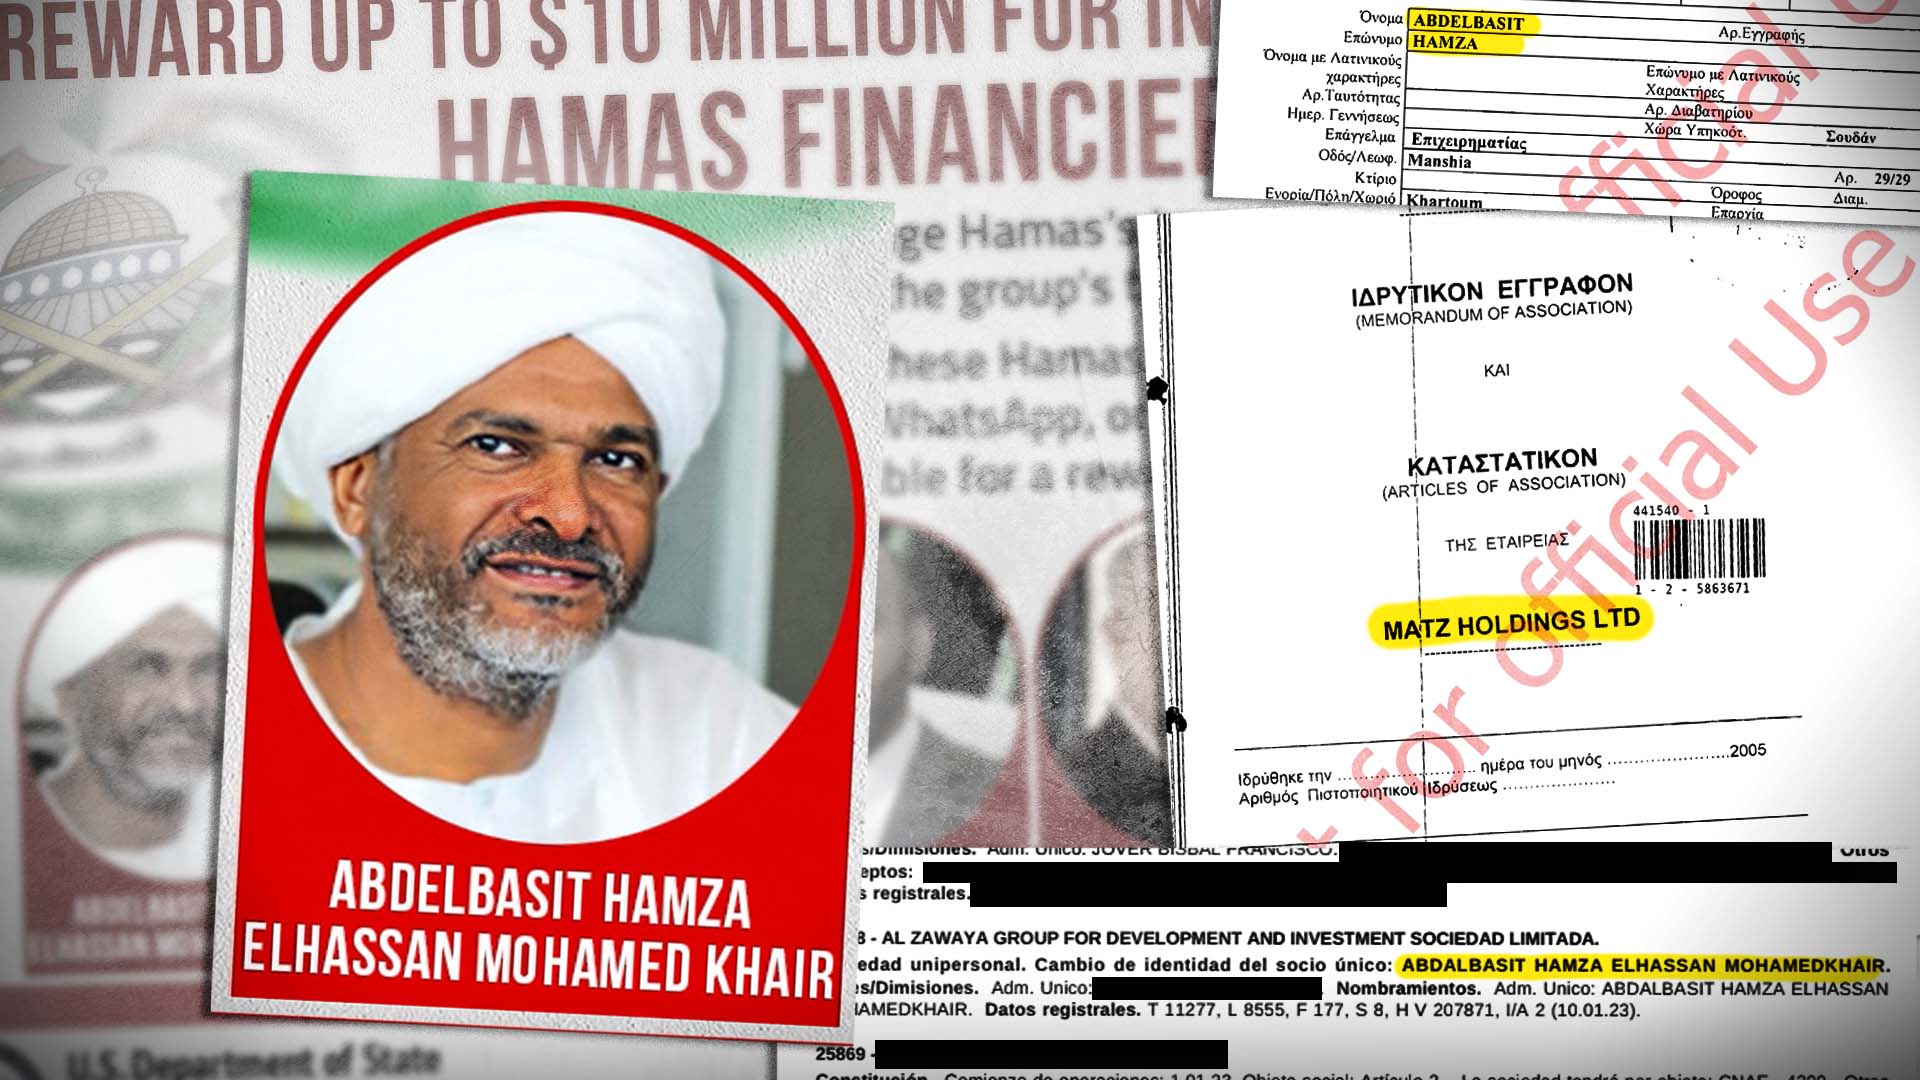 Composite image showing Hamza's face from a wanted poster and document clippings from Cyprus Confidential.